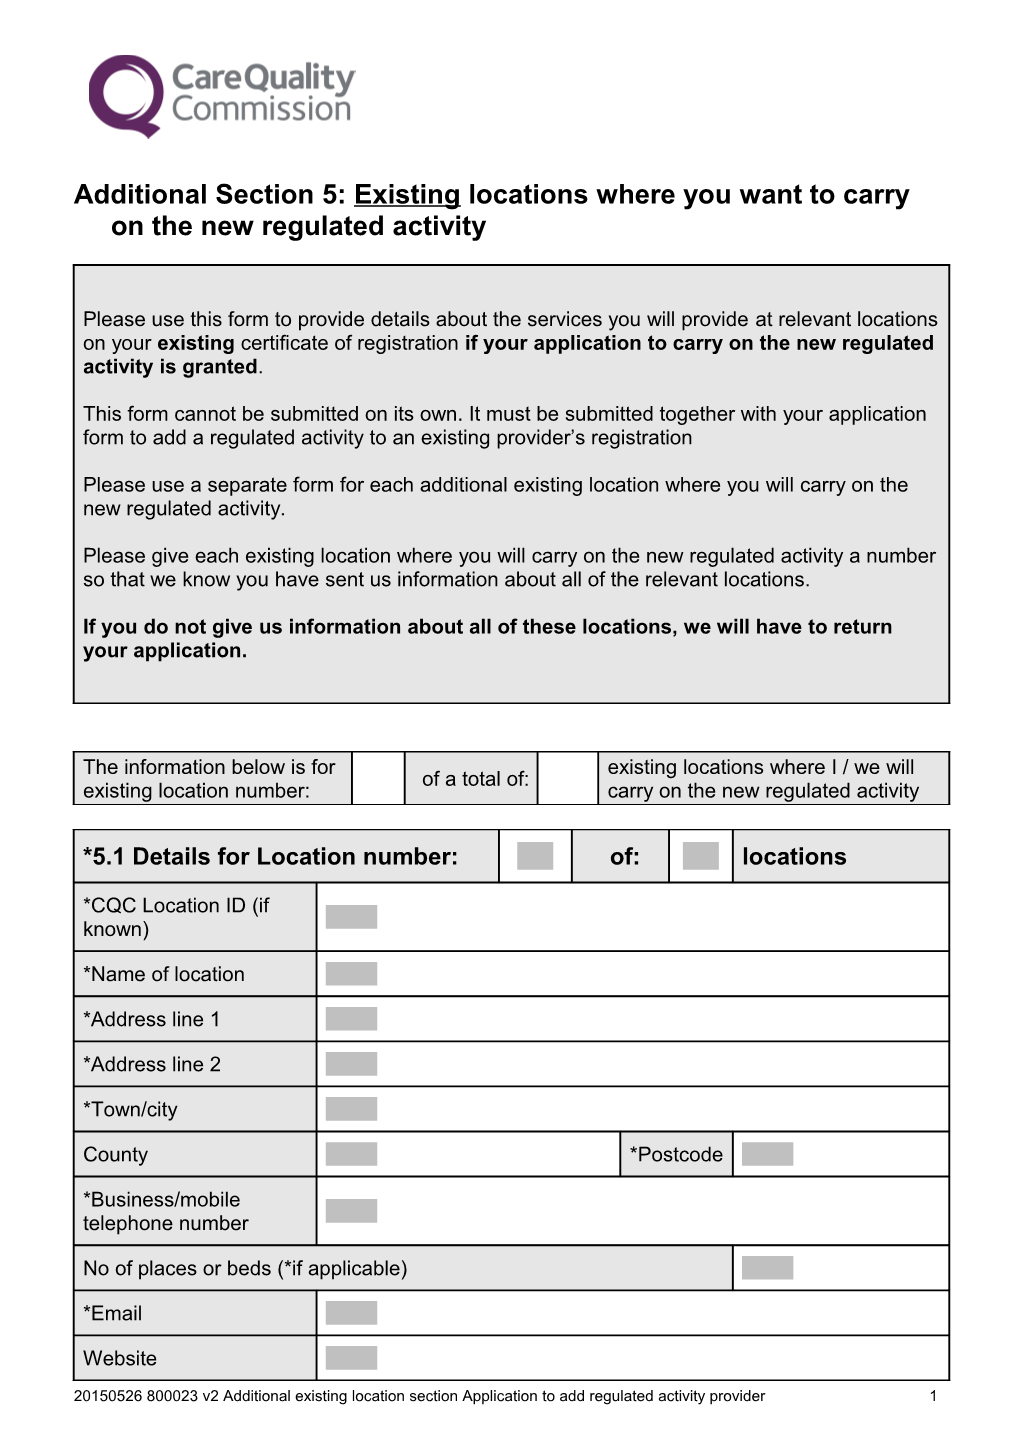 Form for Additional Existing Location for New RA